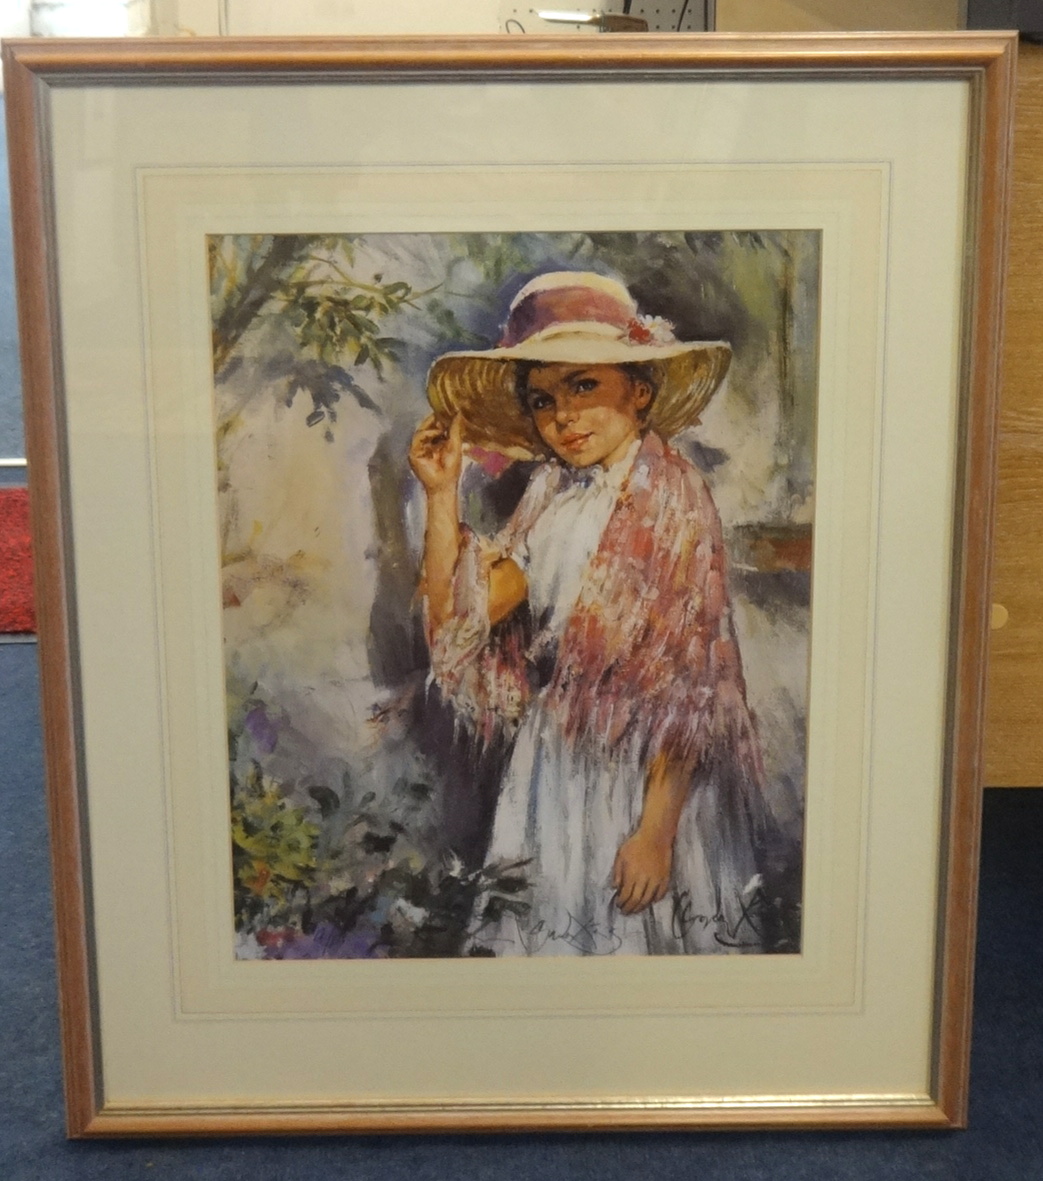 Gordon King, signed limited edition Artist Proof, 'Girl with Straw Hat' print, 45cm x 35cm.